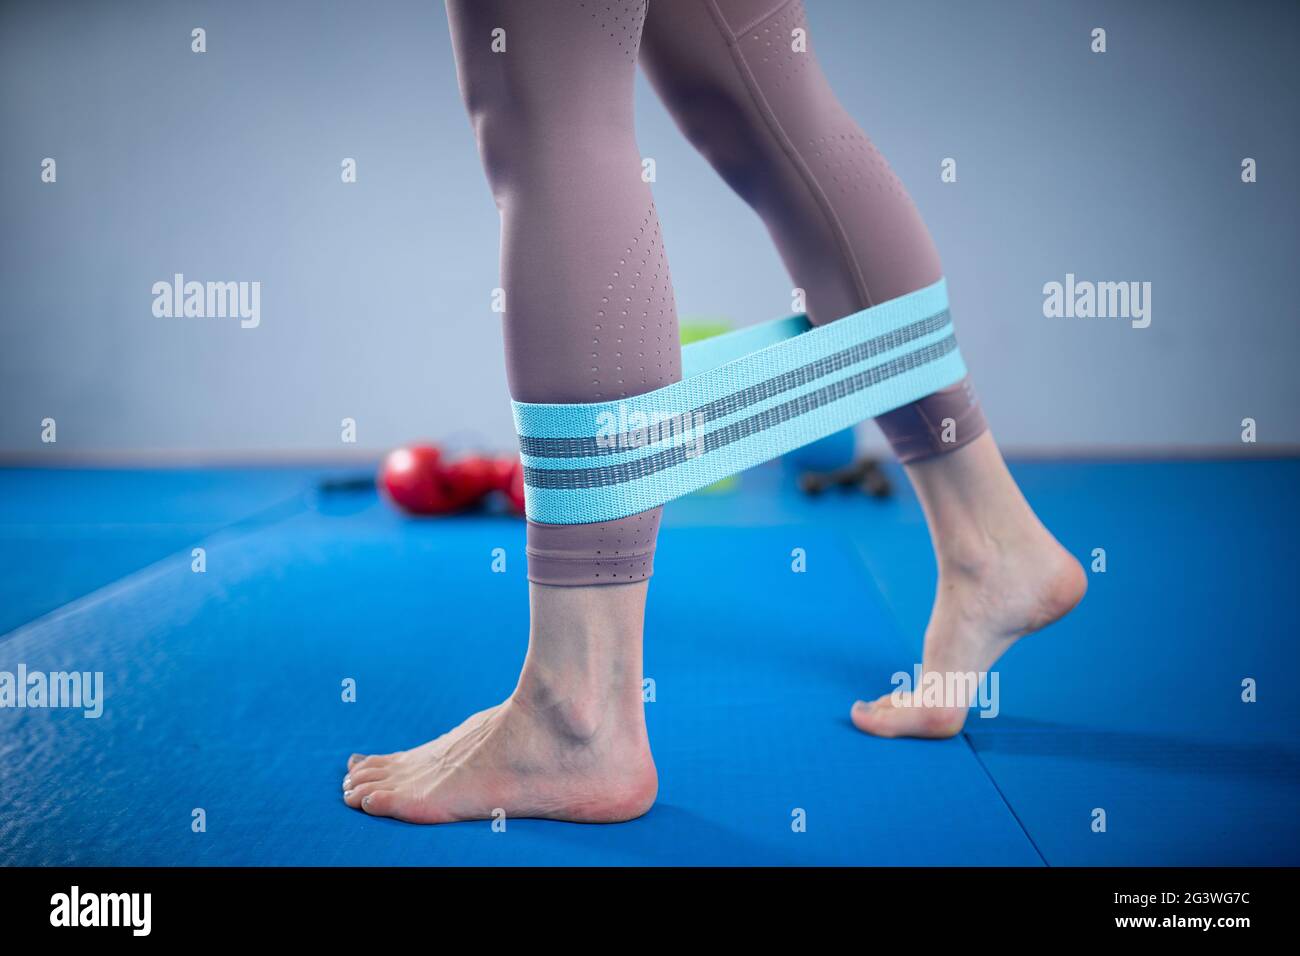 Legs woman barefoot doing pilates exercise with elastic fabric resistance band. Resistance Bands for butt and Legs, Exercise ban Stock Photo